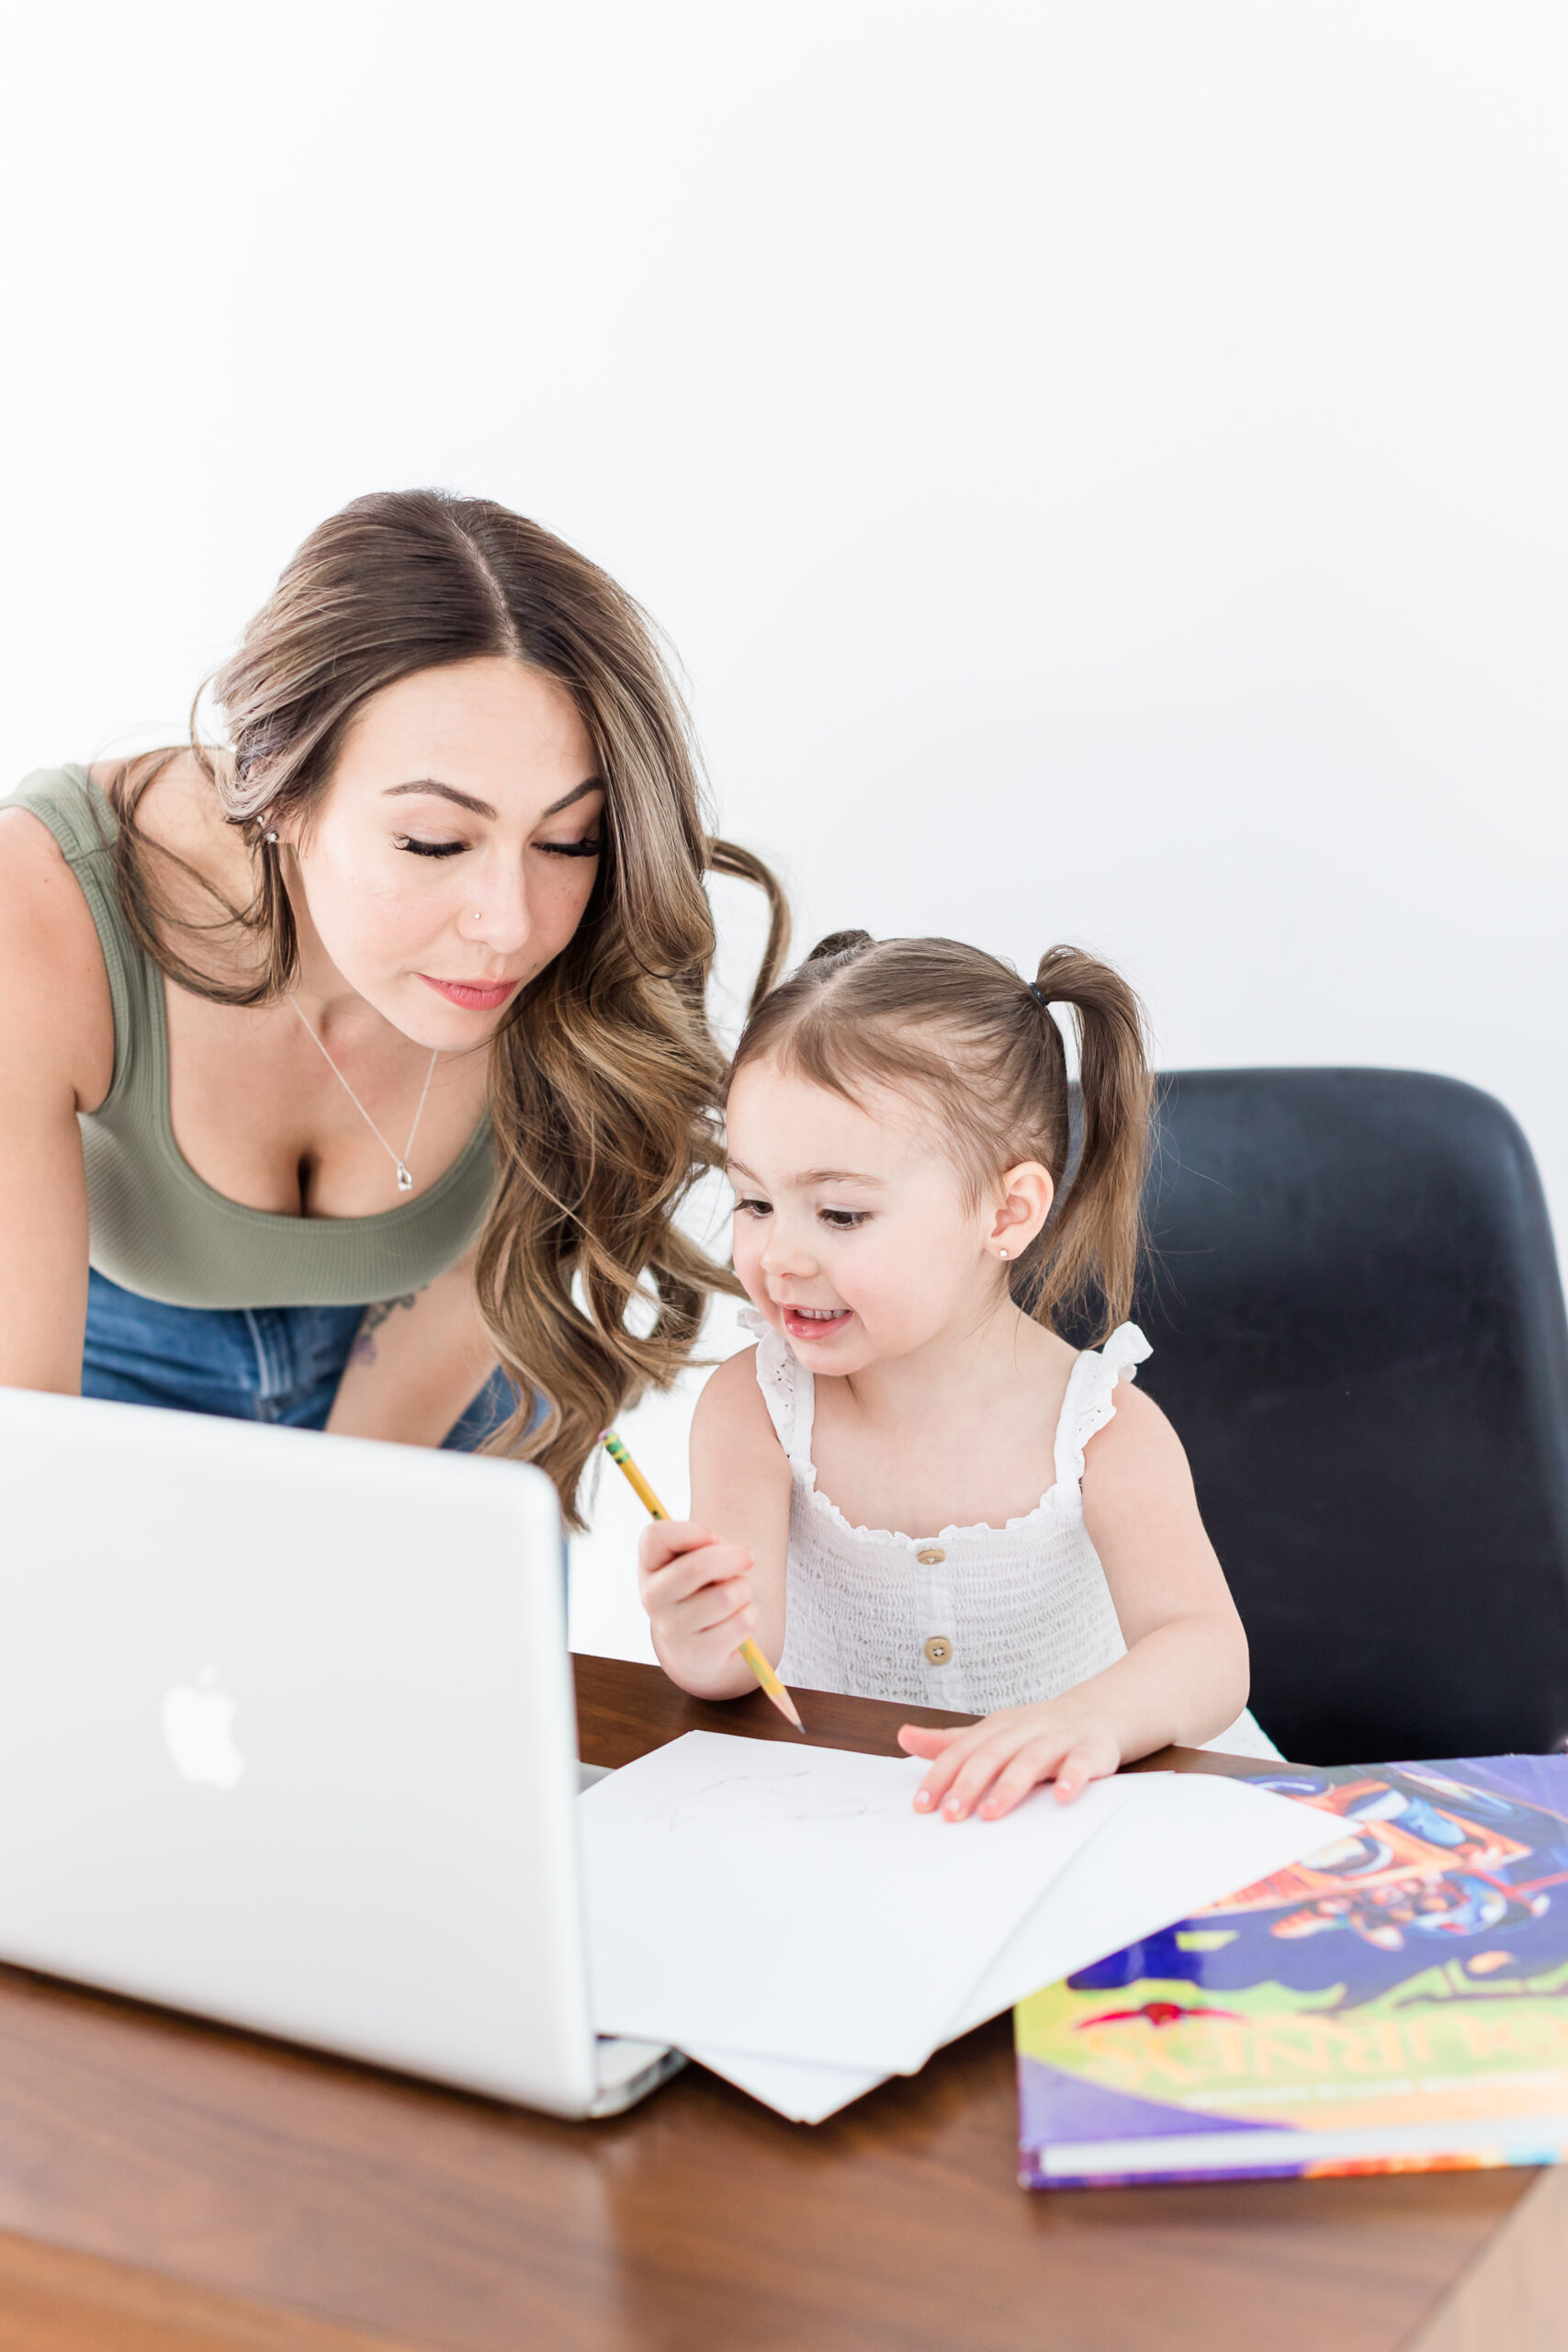 Working moms on a budget